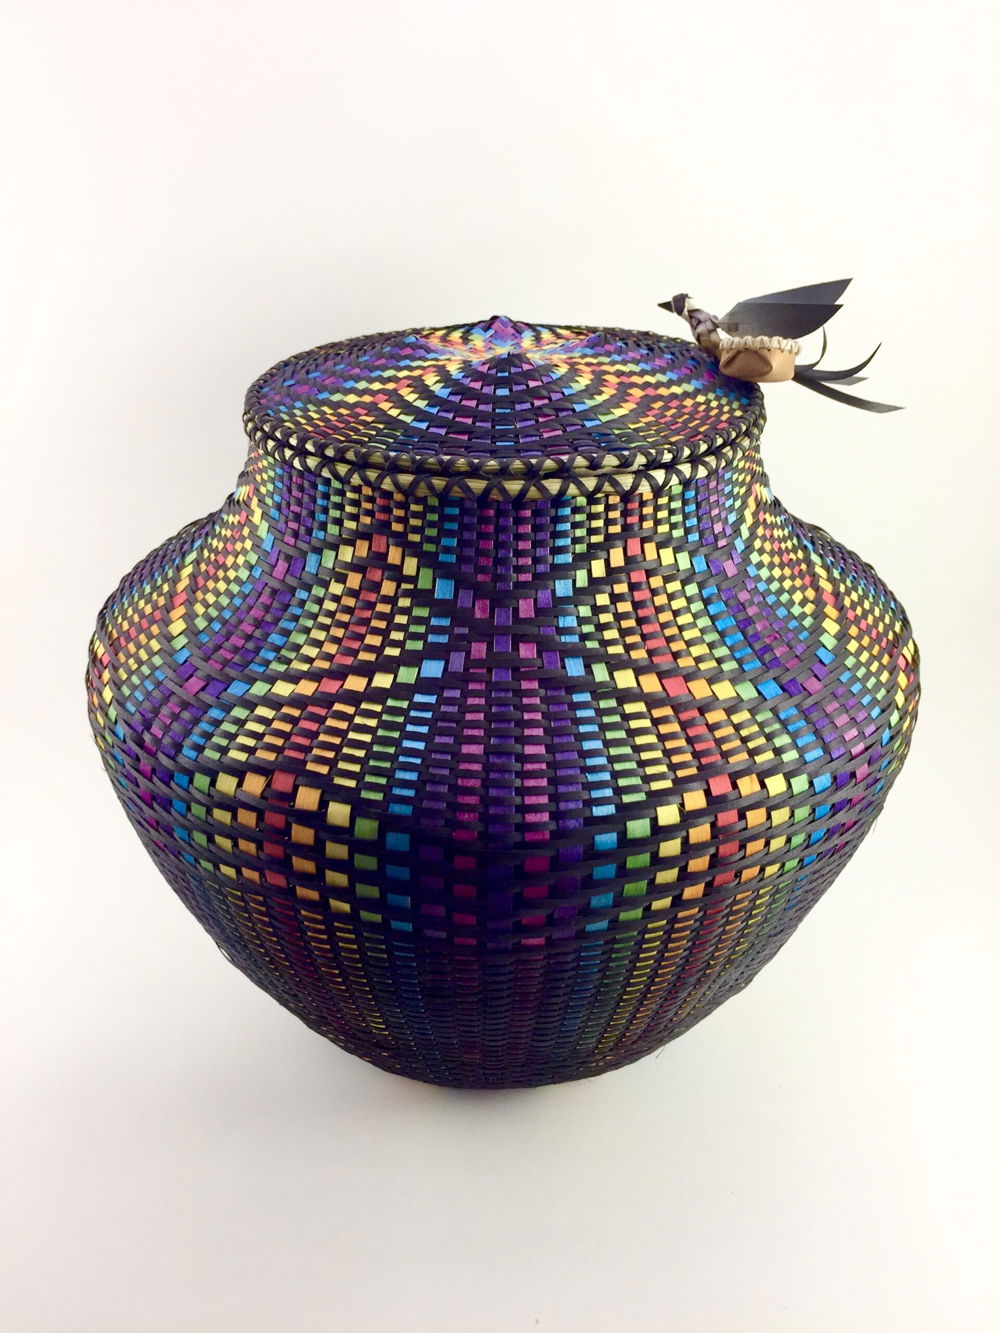 Photo of a brightly colored basket, with rainbow stripes woven through intricate patterns of black strips. A tiny woven bird rests on one edge of the basket lid.